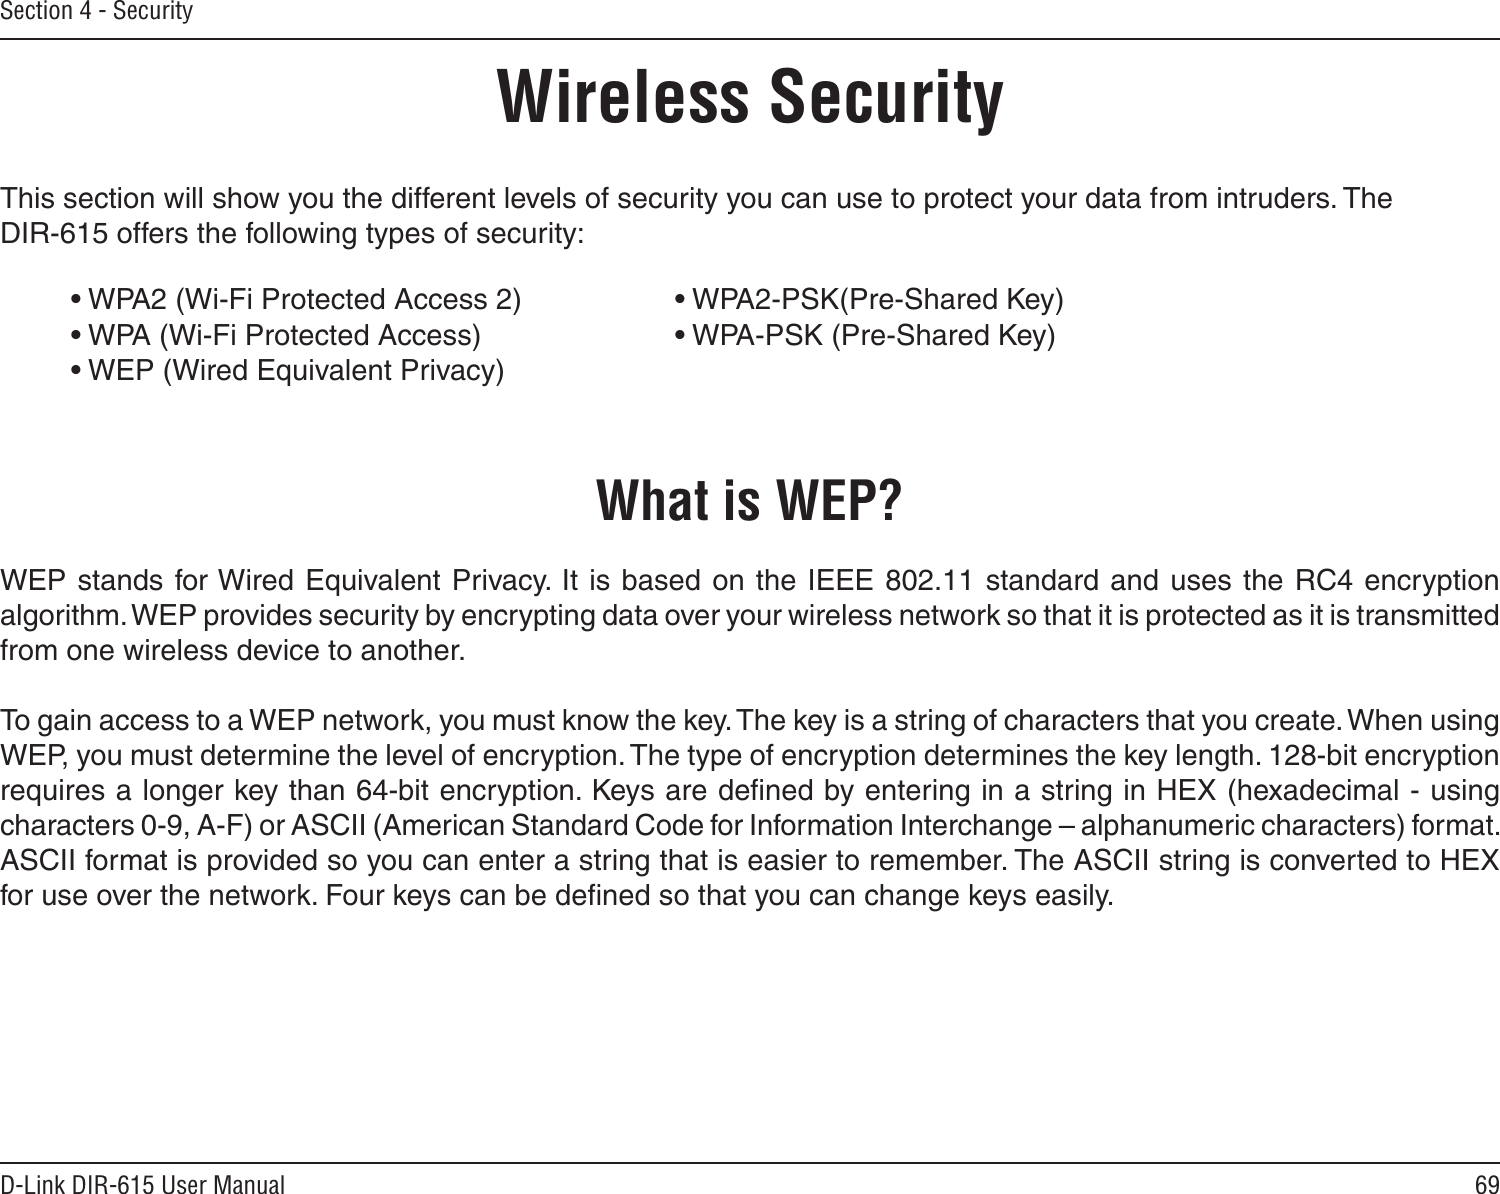 69D-Link DIR-615 User ManualSection 4 - SecurityWireless SecurityThis section will show you the different levels of security you can use to protect your data from intruders. The DIR-615 offers the following types of security:• WPA2 (Wi-Fi Protected Access 2)     • WPA2-PSK(Pre-Shared Key)• WPA (Wi-Fi Protected Access)      • WPA-PSK (Pre-Shared Key)• WEP (Wired Equivalent Privacy)What is WEP?WEP stands for Wired Equivalent Privacy. It  is based on the IEEE  802.11 standard and  uses the RC4  encryption algorithm. WEP provides security by encrypting data over your wireless network so that it is protected as it is transmitted from one wireless device to another.To gain access to a WEP network, you must know the key. The key is a string of characters that you create. When using WEP, you must determine the level of encryption. The type of encryption determines the key length. 128-bit encryption requires a longer key than 64-bit encryption. Keys are deﬁned by entering in a string in HEX (hexadecimal - using characters 0-9, A-F) or ASCII (American Standard Code for Information Interchange – alphanumeric characters) format. ASCII format is provided so you can enter a string that is easier to remember. The ASCII string is converted to HEX for use over the network. Four keys can be deﬁned so that you can change keys easily.